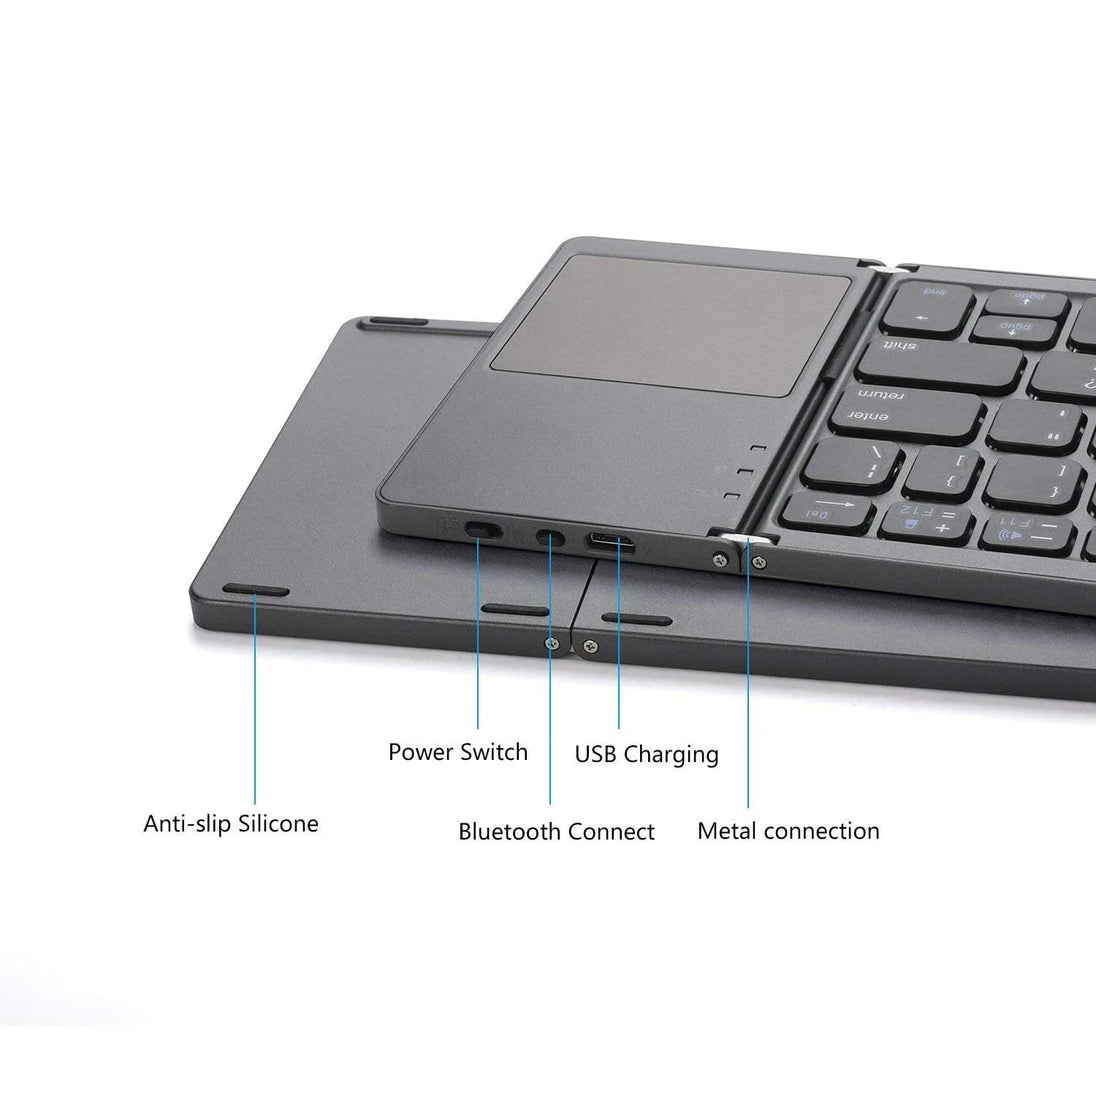 Enhance Productivity on the Go with our Portable Bluetooth Touch Pad Wireless Keyboard